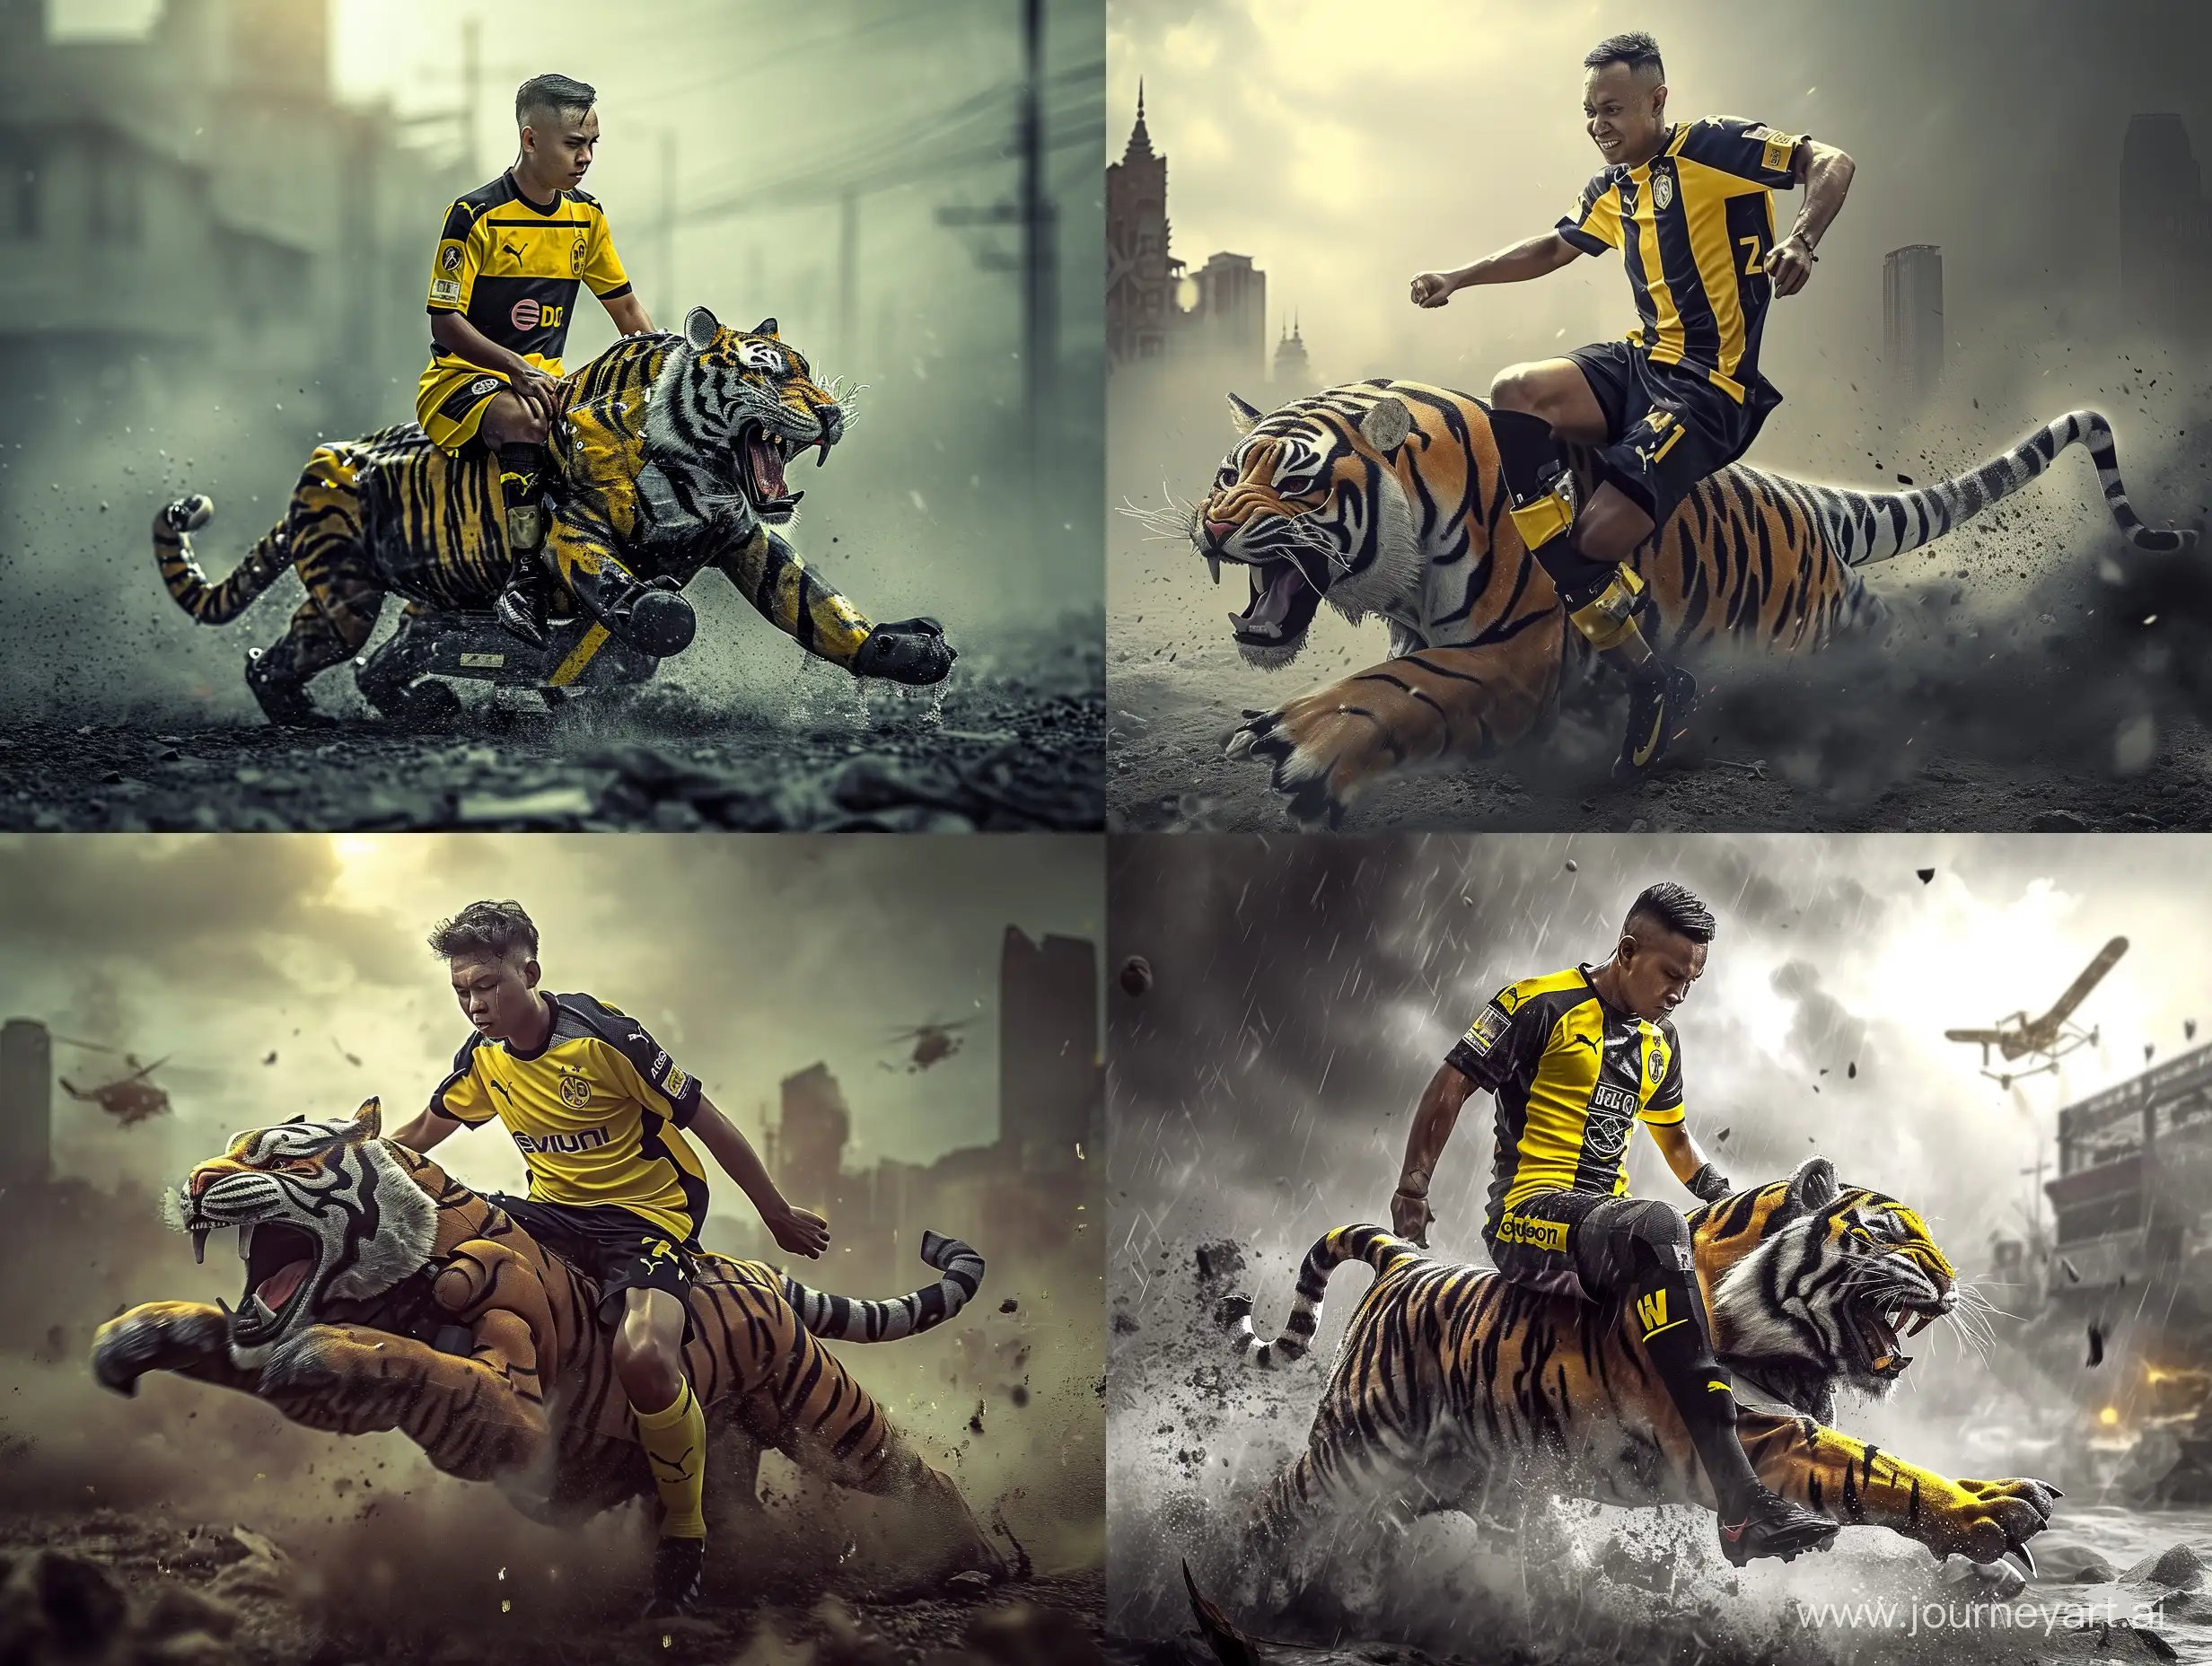 ultra realistic, Malaysia footballer, yellow and black jersey,  ride a tiger robot, war background, canon eos-id x mark iii dslr --v 6.0
